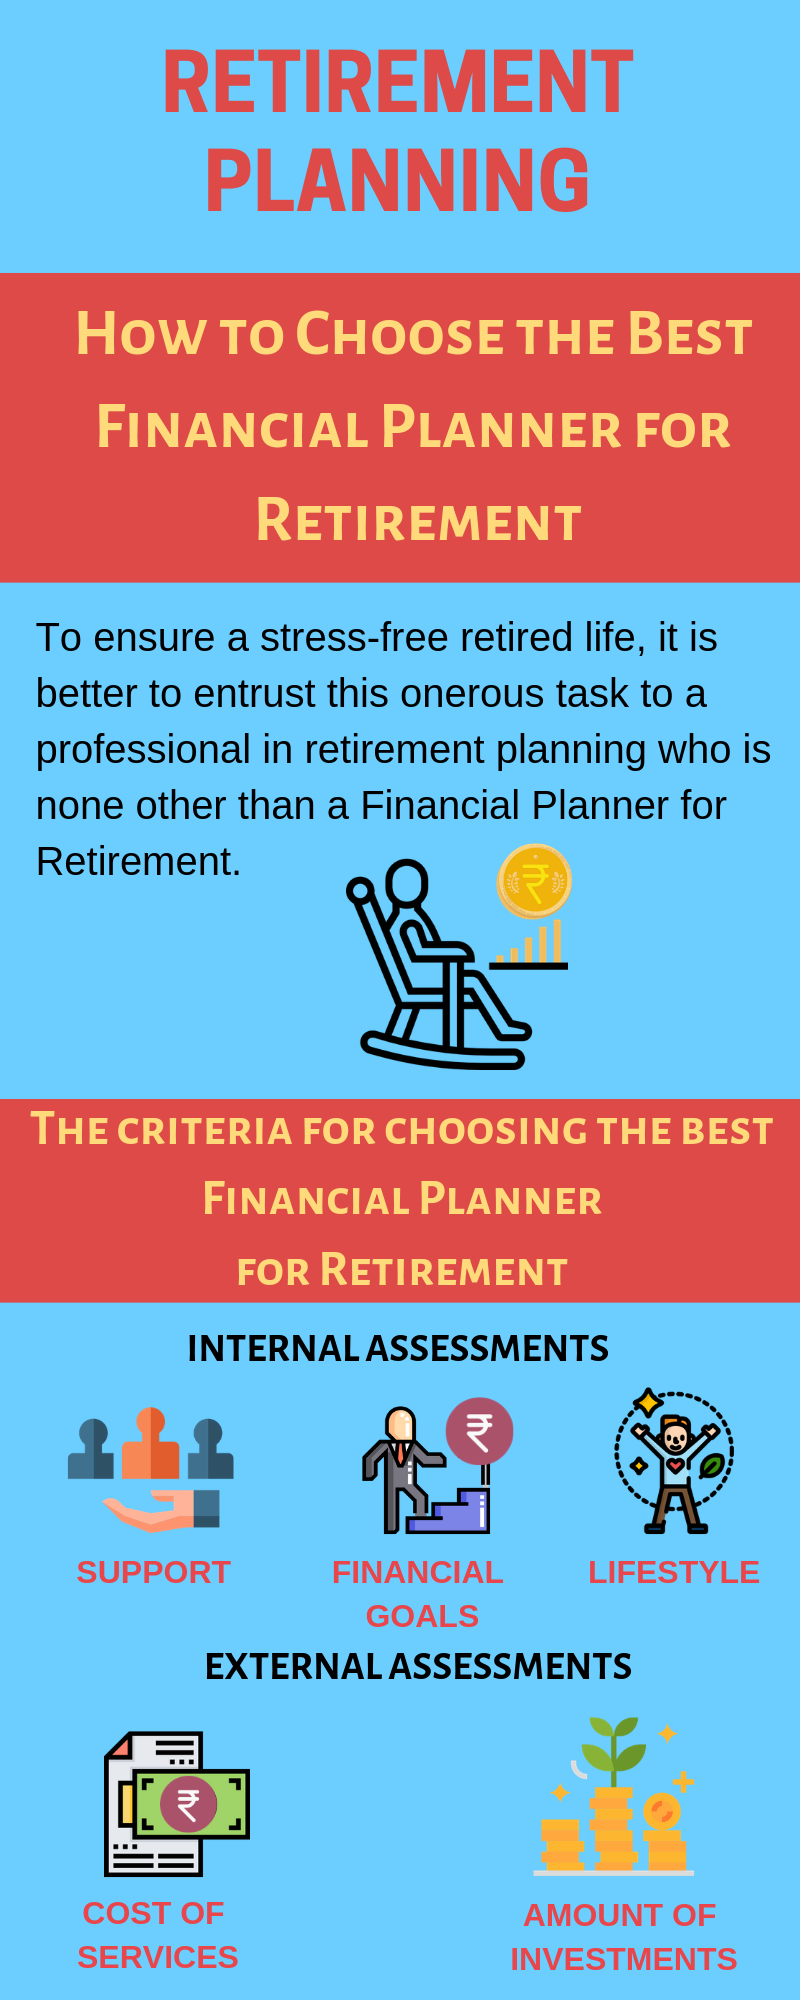 How to Choose the Best Financial Planner for Retirement